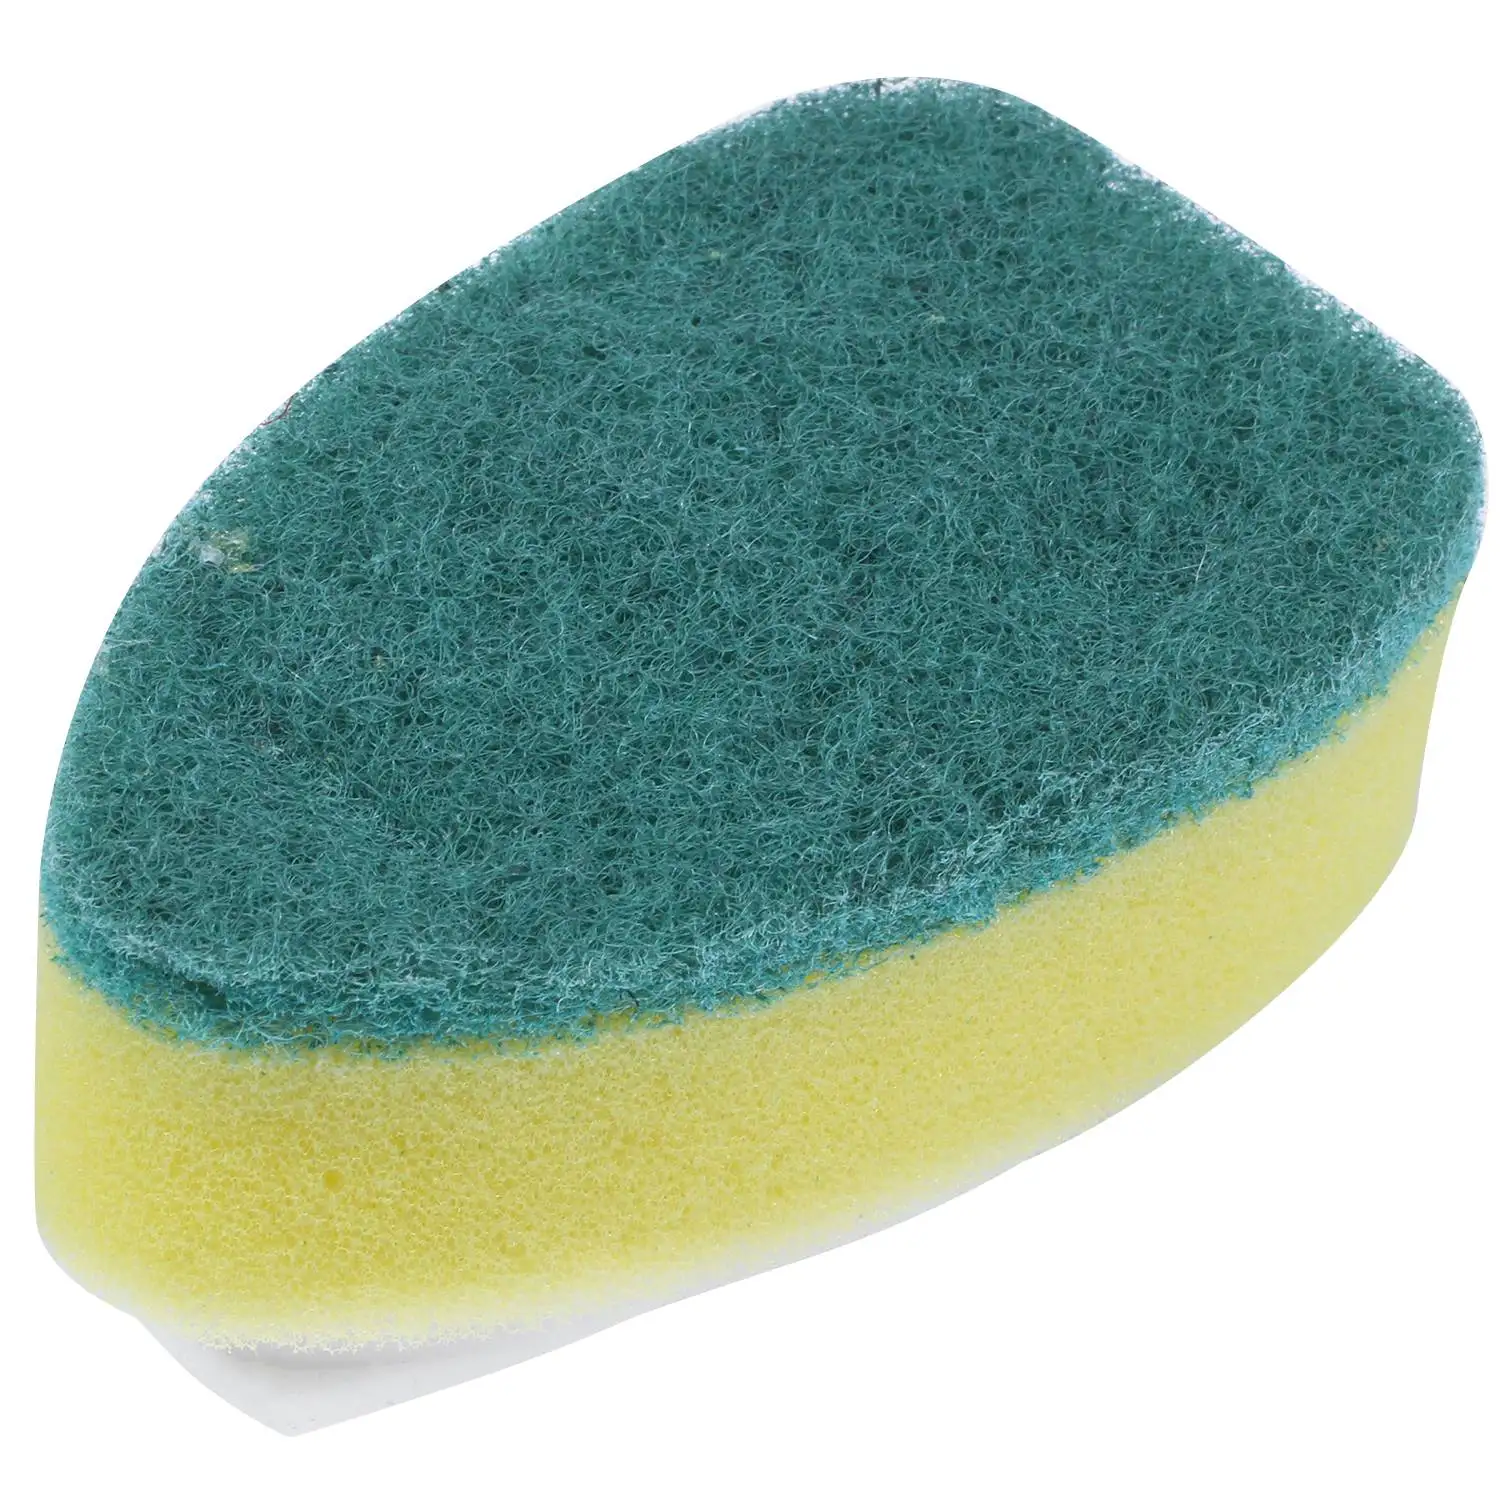 18 Pieces Dish Wand Refills Replacement Sponge Heads Scouring Scrubber Pads  Heavy Duty Dish Wand Sponge for Kitchen Sink Clea - AliExpress